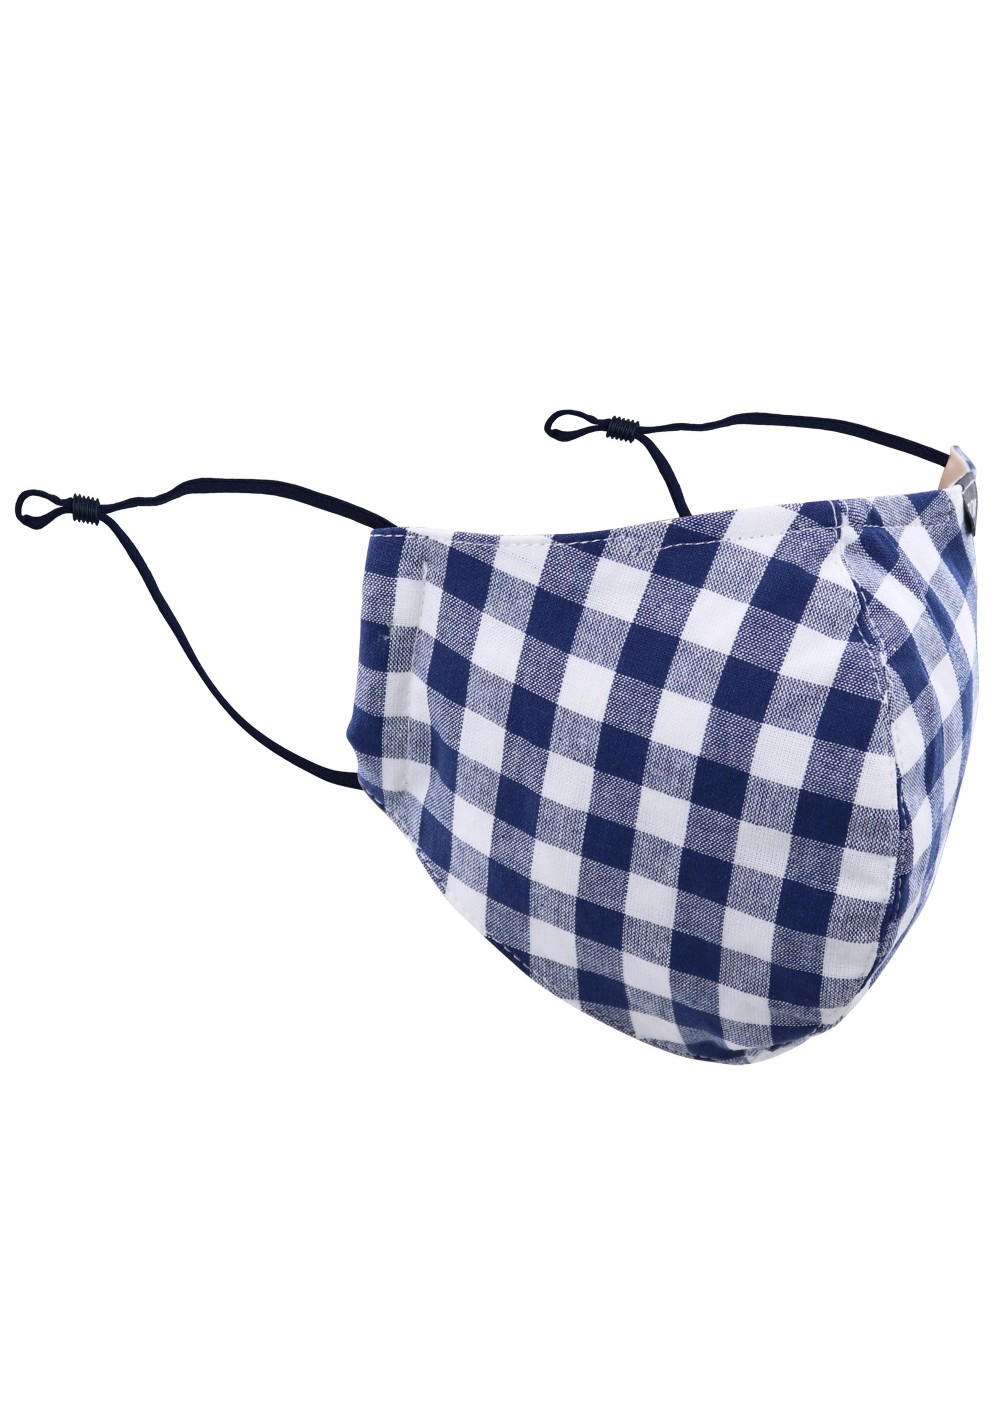 Gingham Check Filter Mask in Navy and White